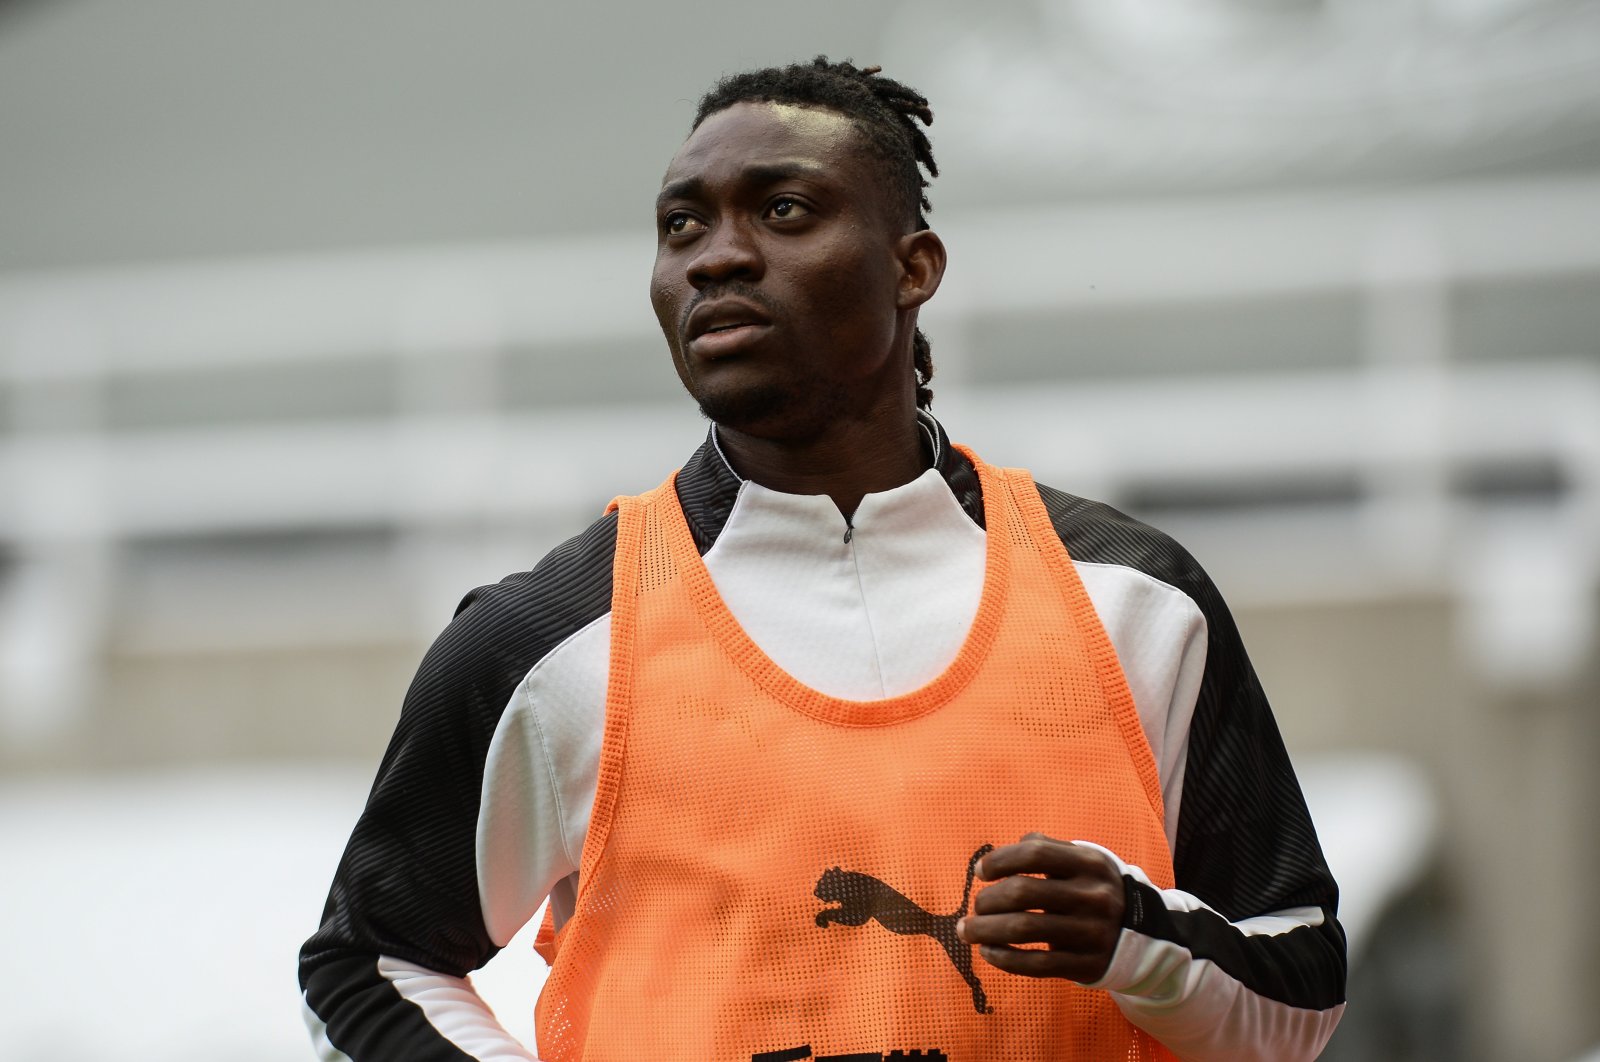 Christian Atsu, warms up before the Premier League football match between Newcastle United and Tottenham Hotspur, at Saint James Park, in Newcastle, U.K., July 15, 2020. (Getty Images Photo)